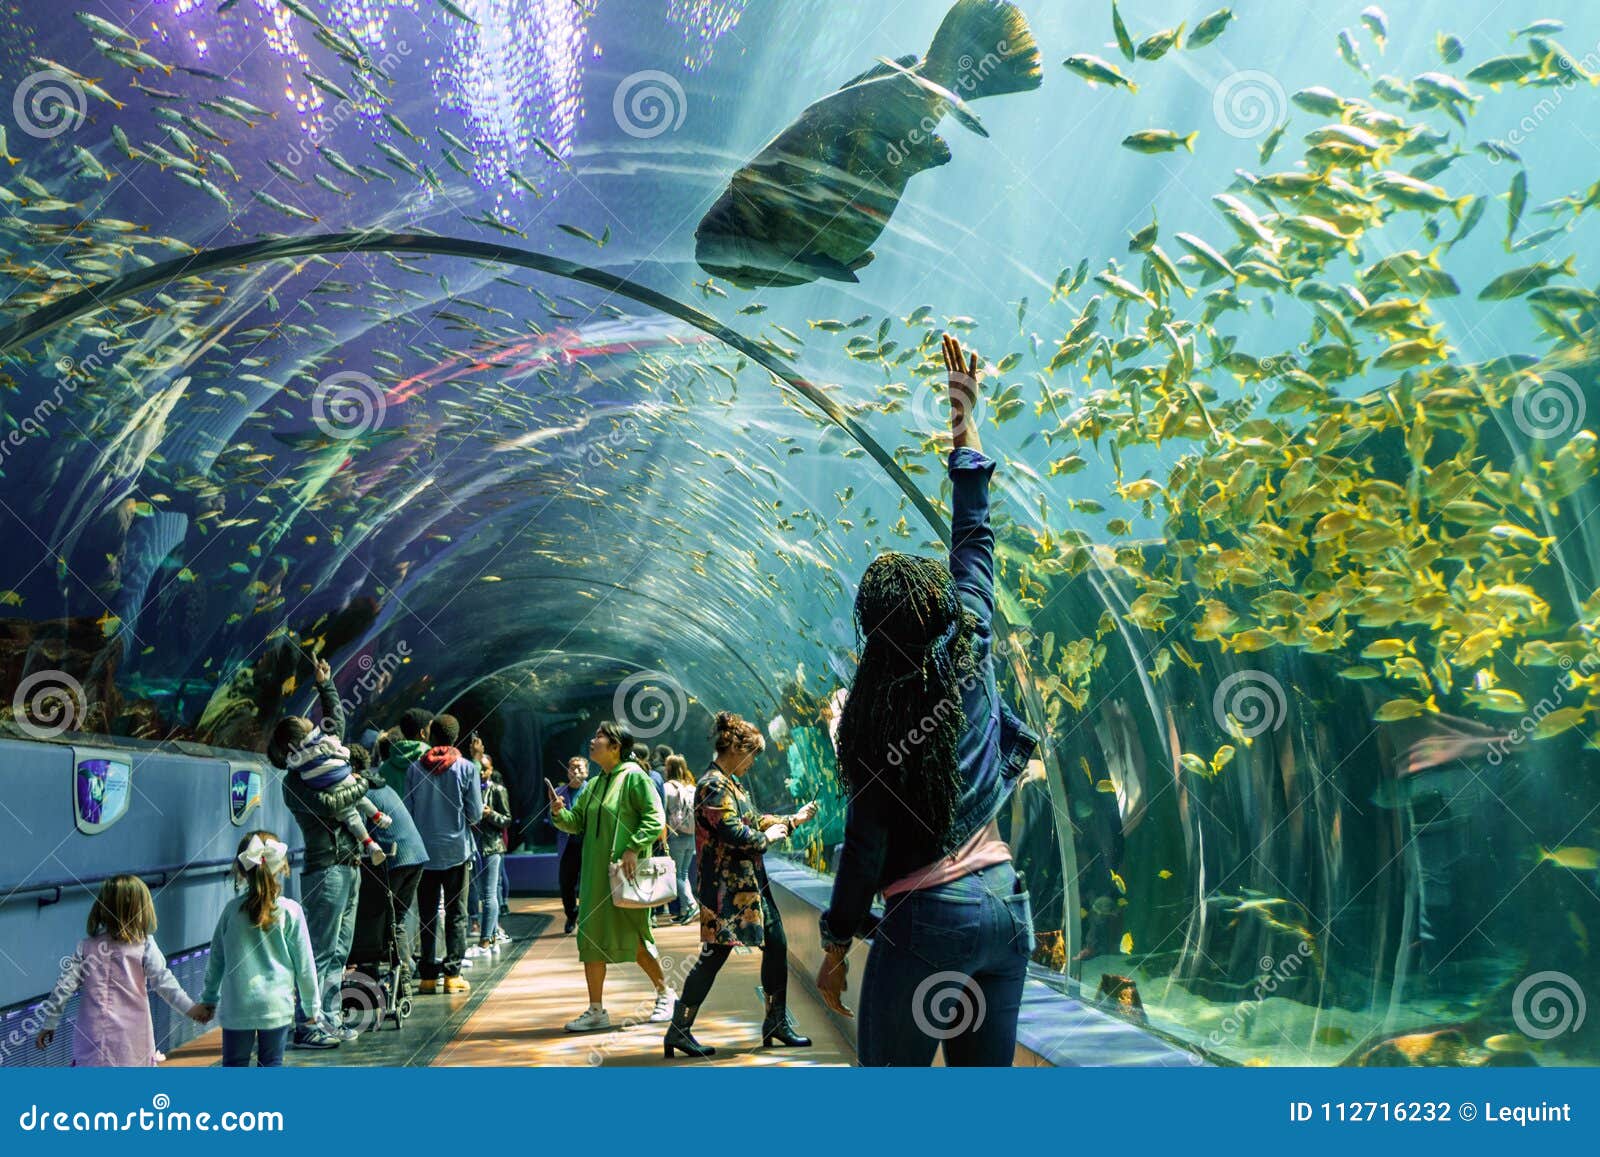 People Stand in Awe in a Tunnel of Plexiglass Showing Sea Creatures at ...